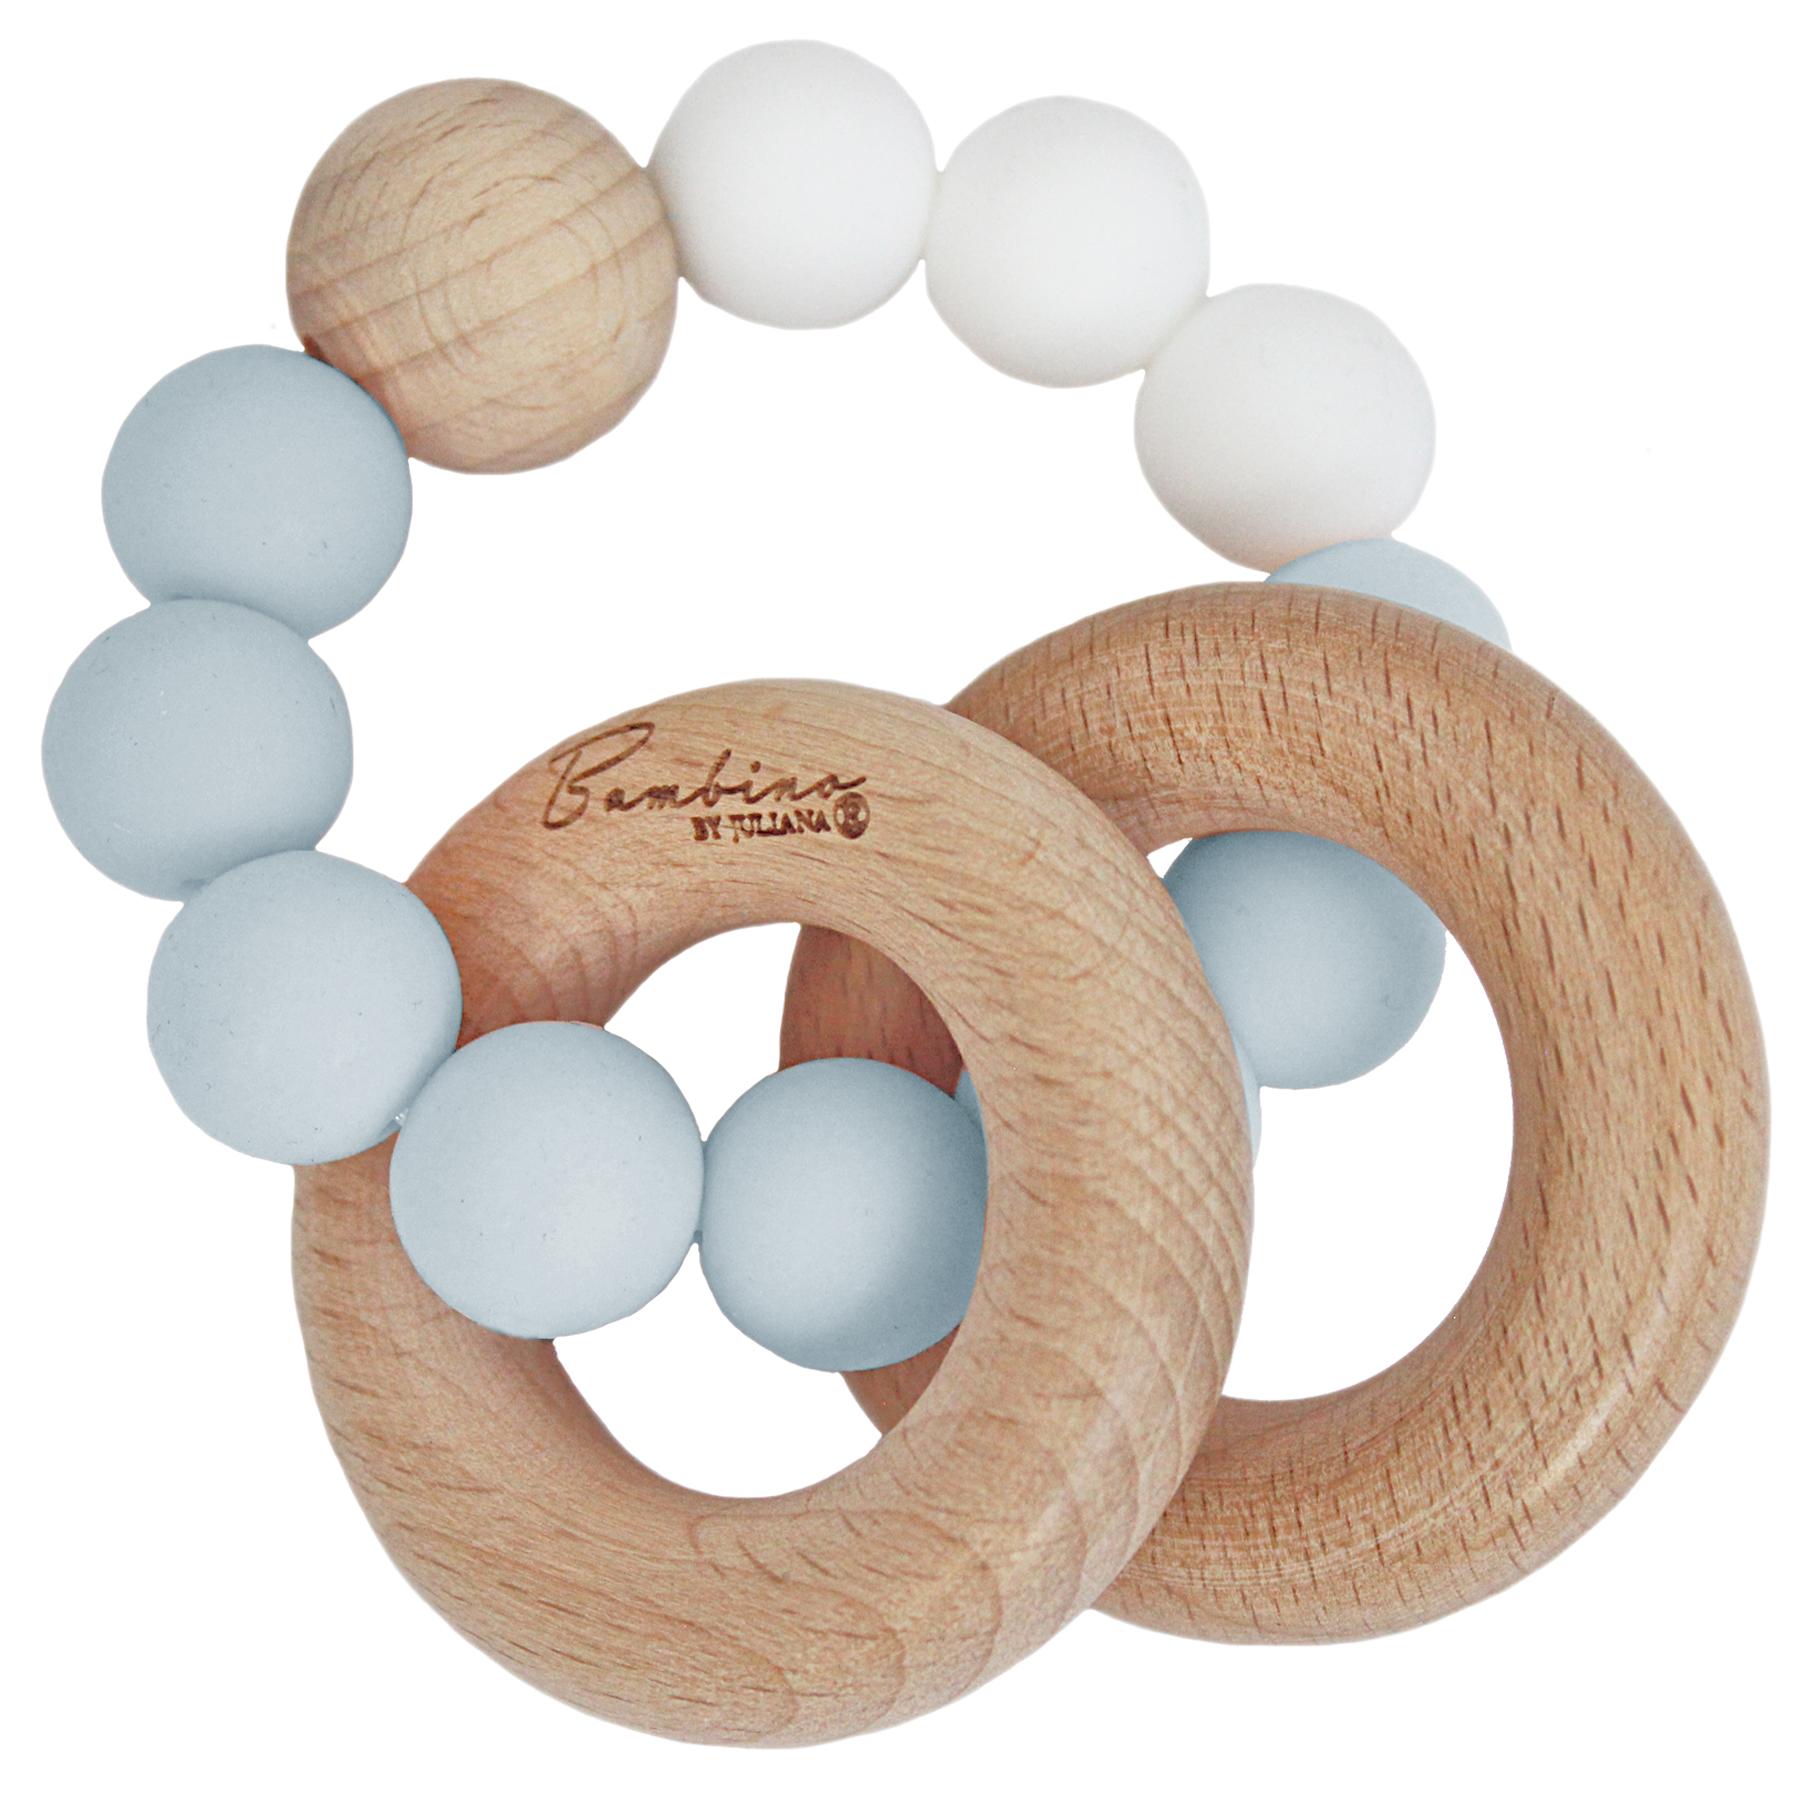 Bambino by Juliana® Wooden Rings & Blue Silicone Beads Teether